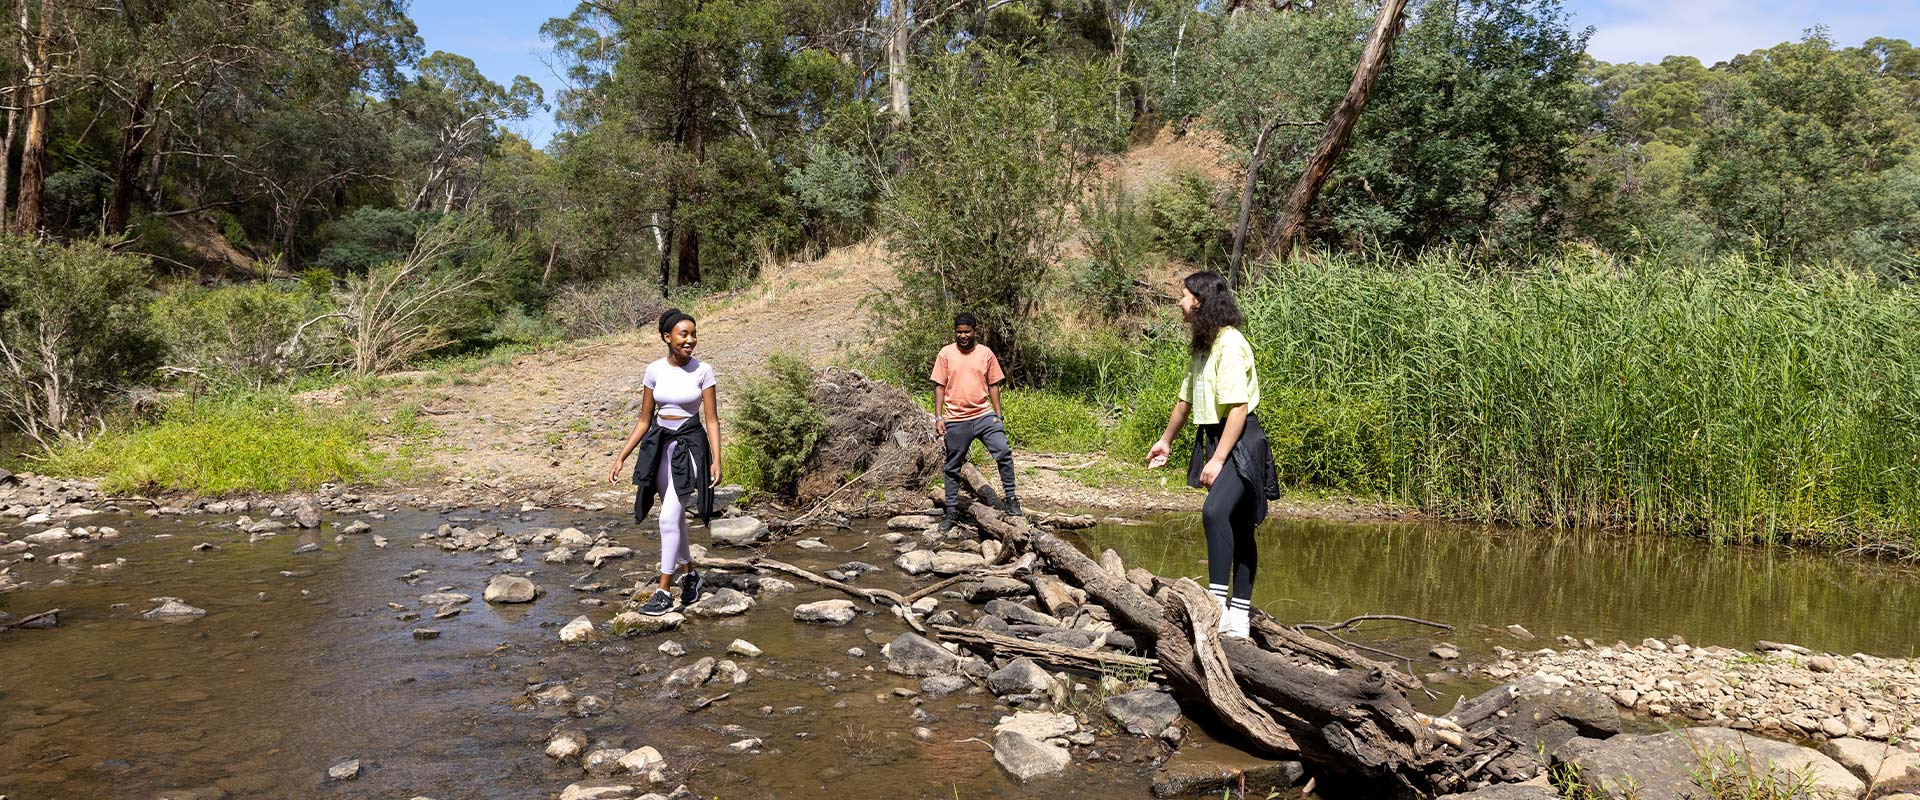 Three people from CALD backgrounds cross a shallow river by stepping across stones